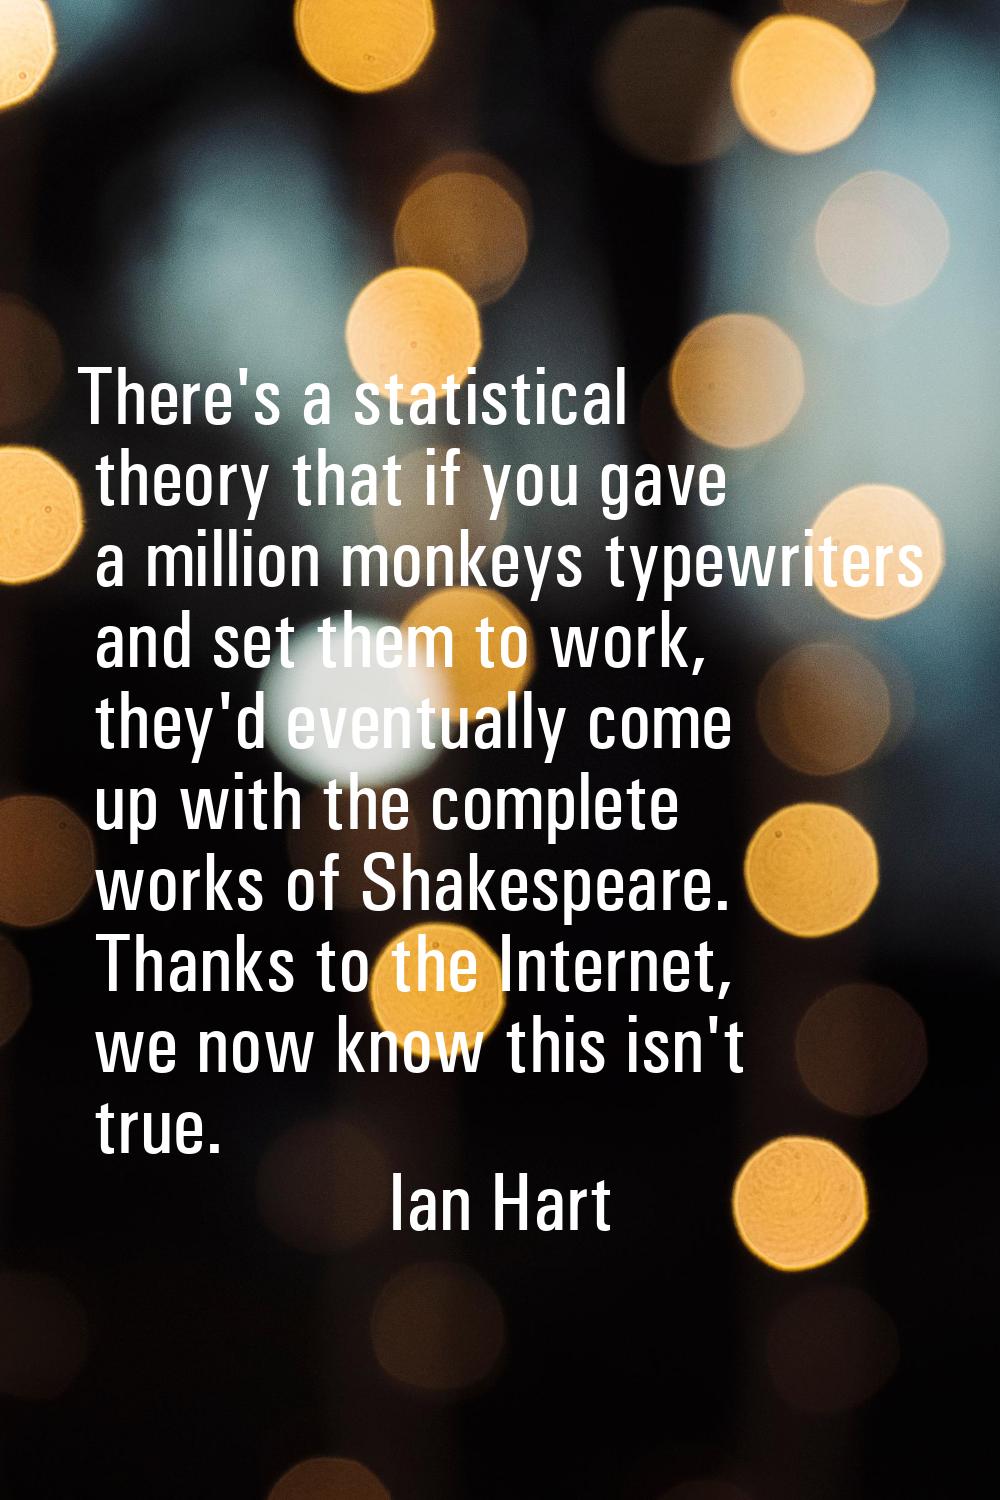 There's a statistical theory that if you gave a million monkeys typewriters and set them to work, t